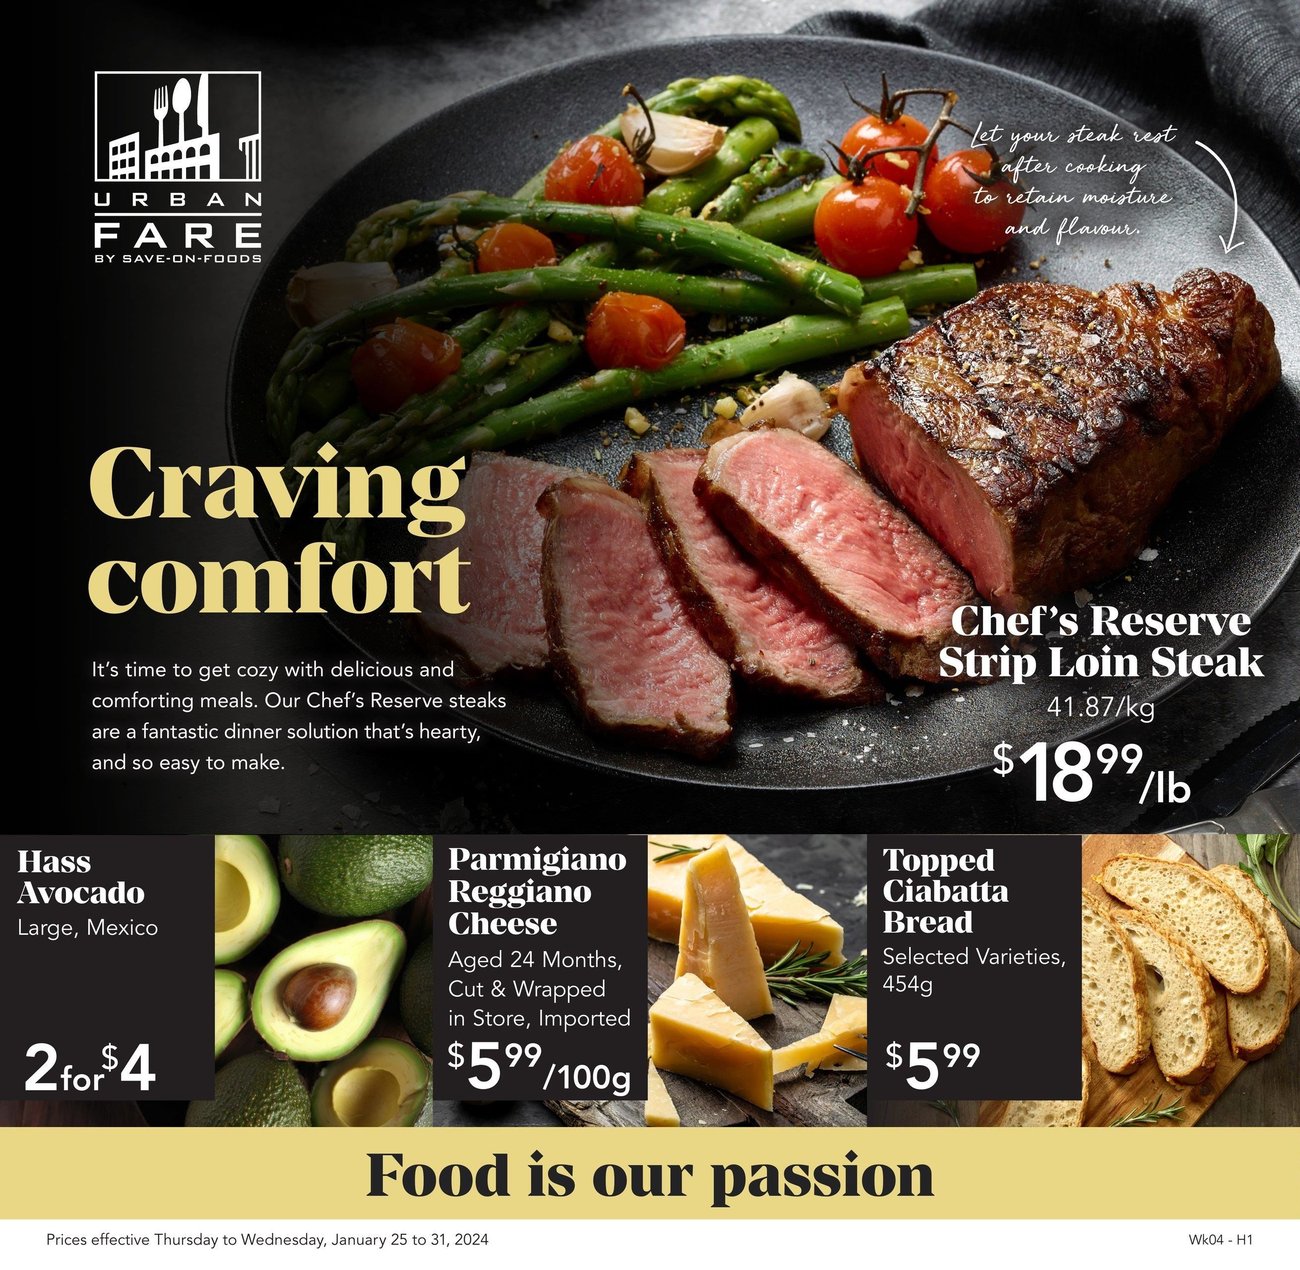 Urban Fare - Weekly Flyer Specials from Jan 25th to Jan 31st 2024 ...